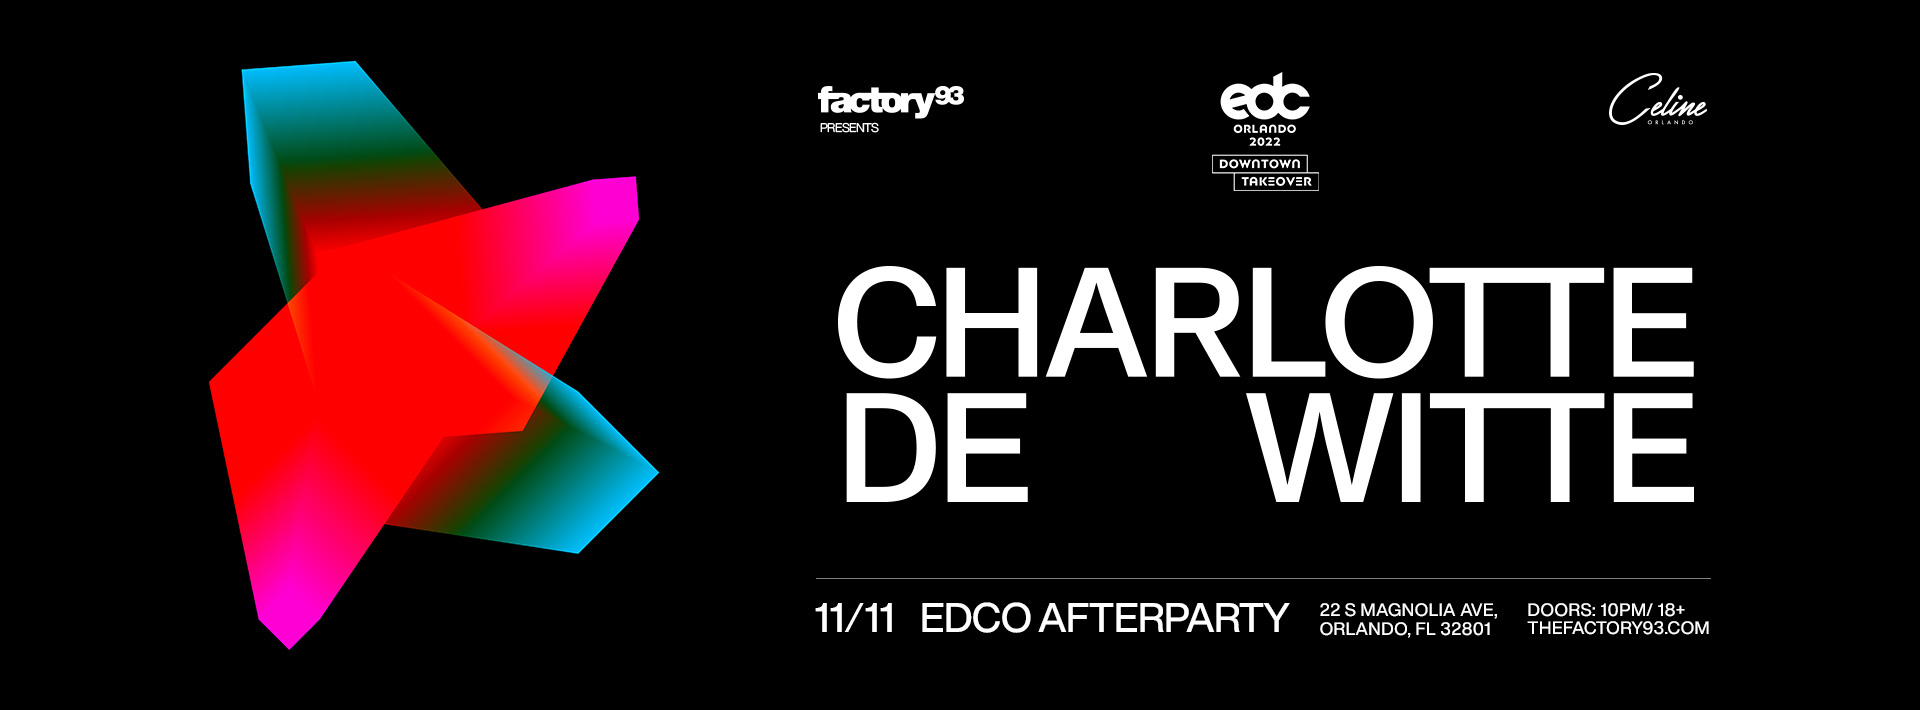 EDC Orlando Afterparty: Charlotte de Witte